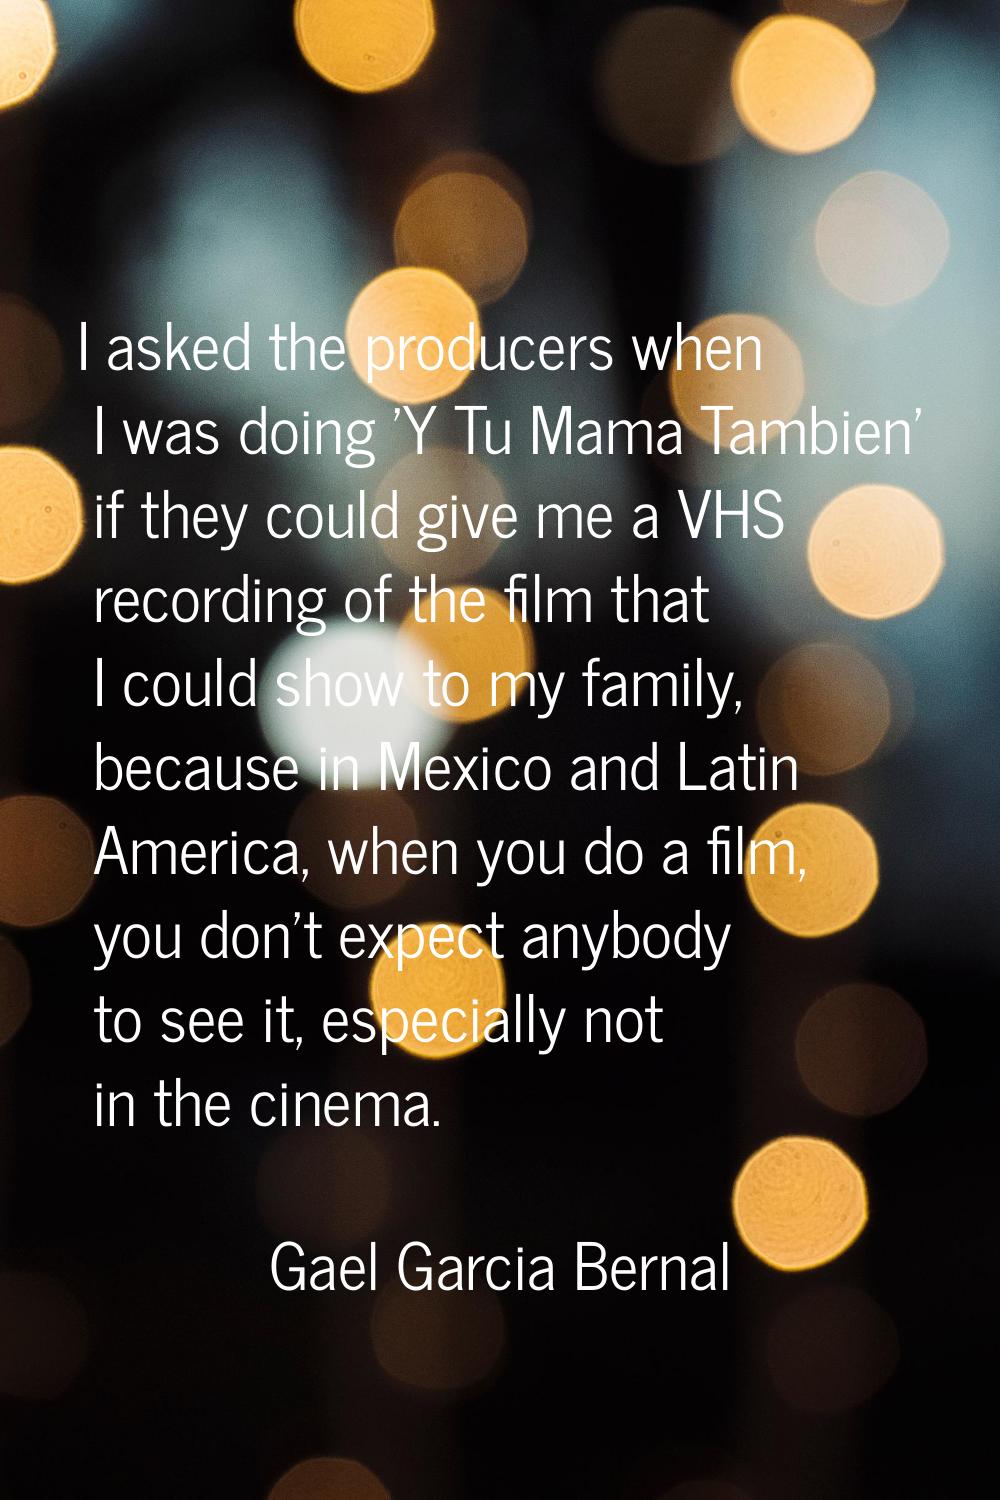 I asked the producers when I was doing 'Y Tu Mama Tambien' if they could give me a VHS recording of